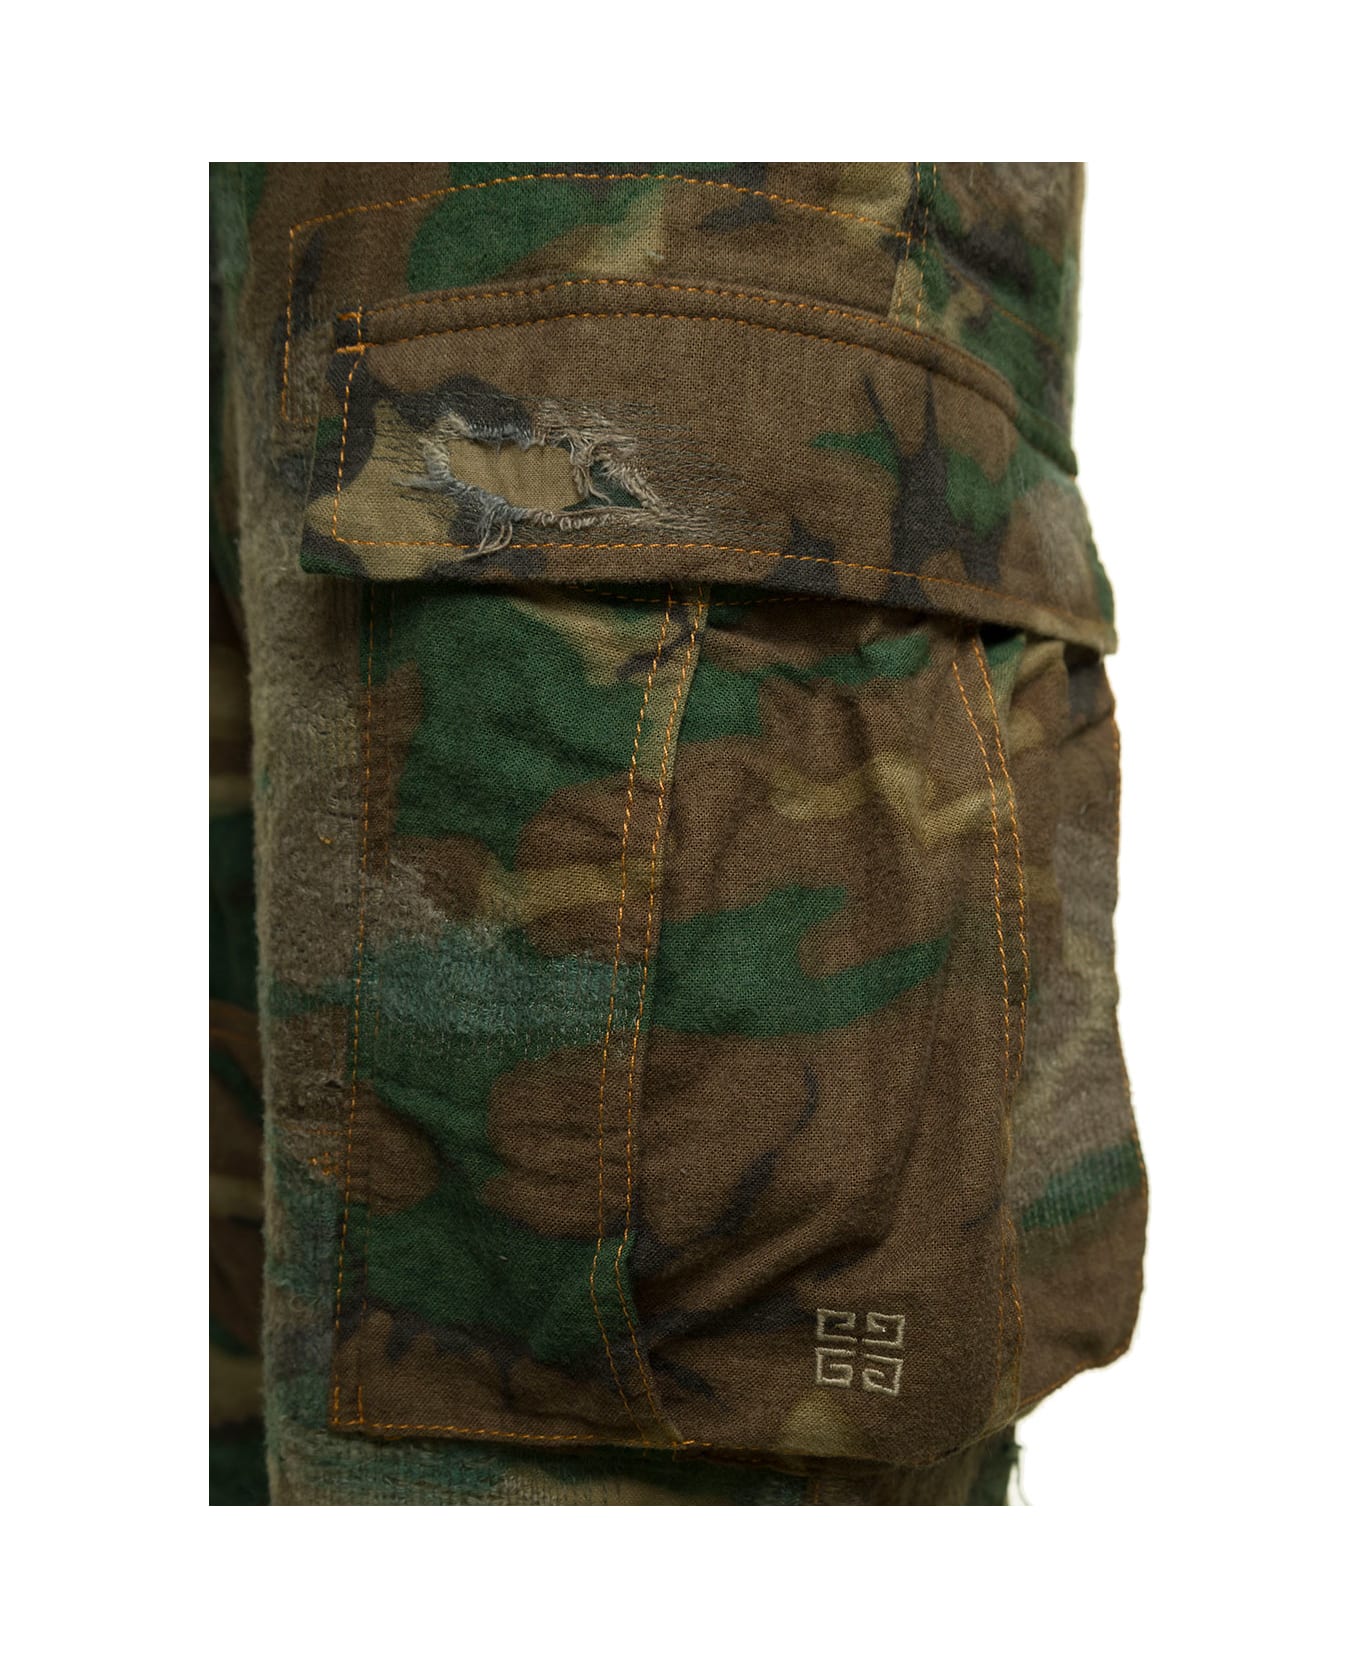 Givenchy Cargo Camouflage Washed Look 16 - BROWNKHAKI